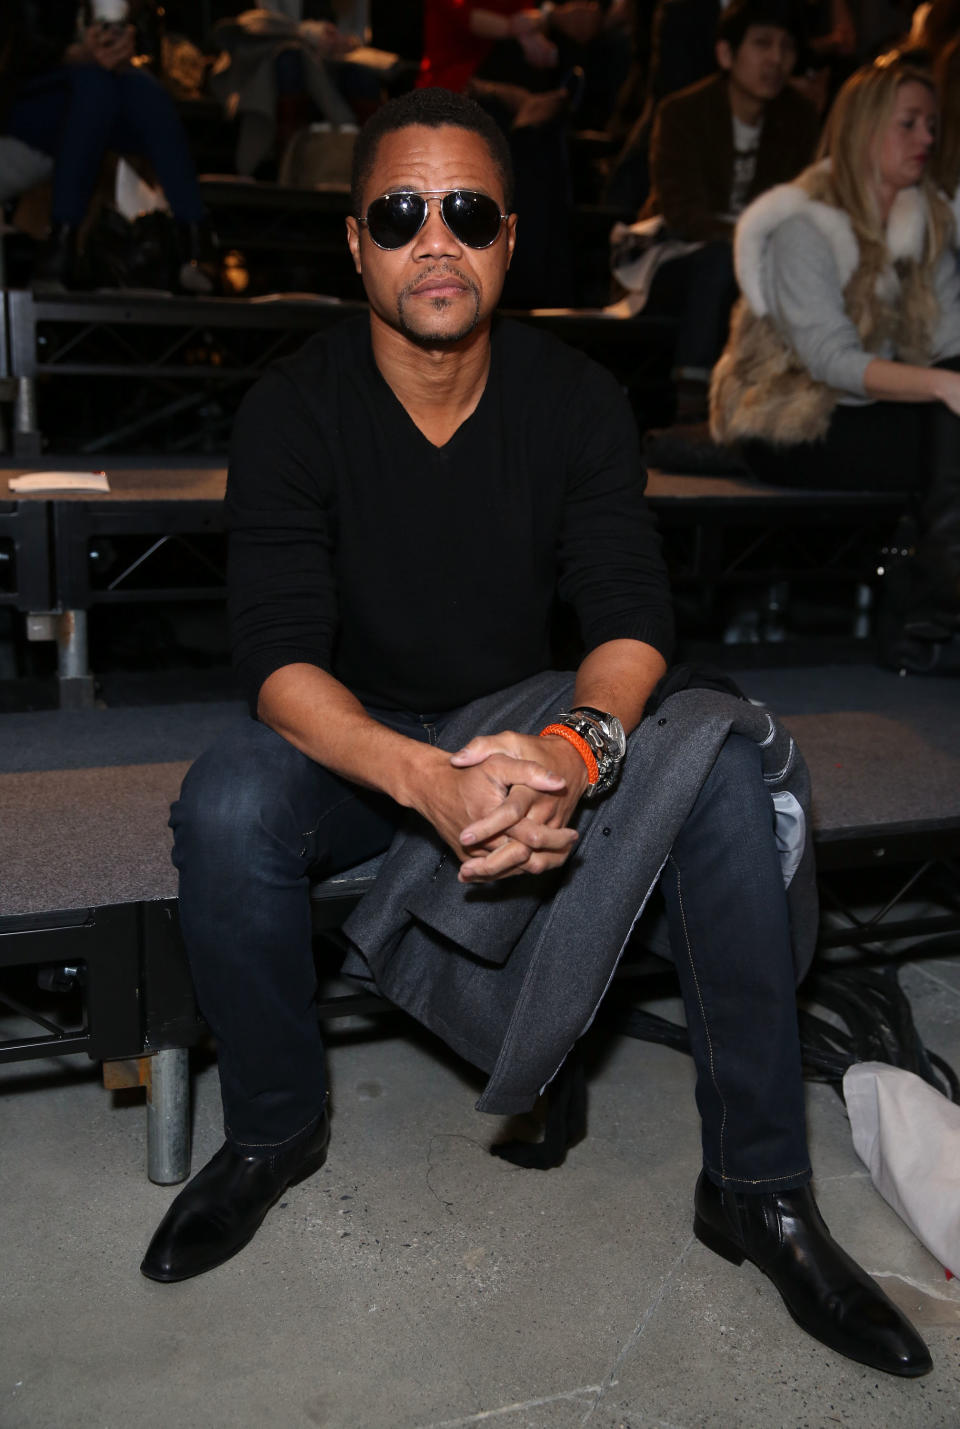 NEW YORK, NY - FEBRUARY 07:  Actor Cuba Gooding Jr. attends the Kenneth Cole Collection Fall 2013 fashion show during Mercedes-Benz Fashion Week at 537 West 27th Street on February 7, 2013 in New York City.  (Photo by Chelsea Lauren/Getty Images for Mercedes-Benz Fashion Week)